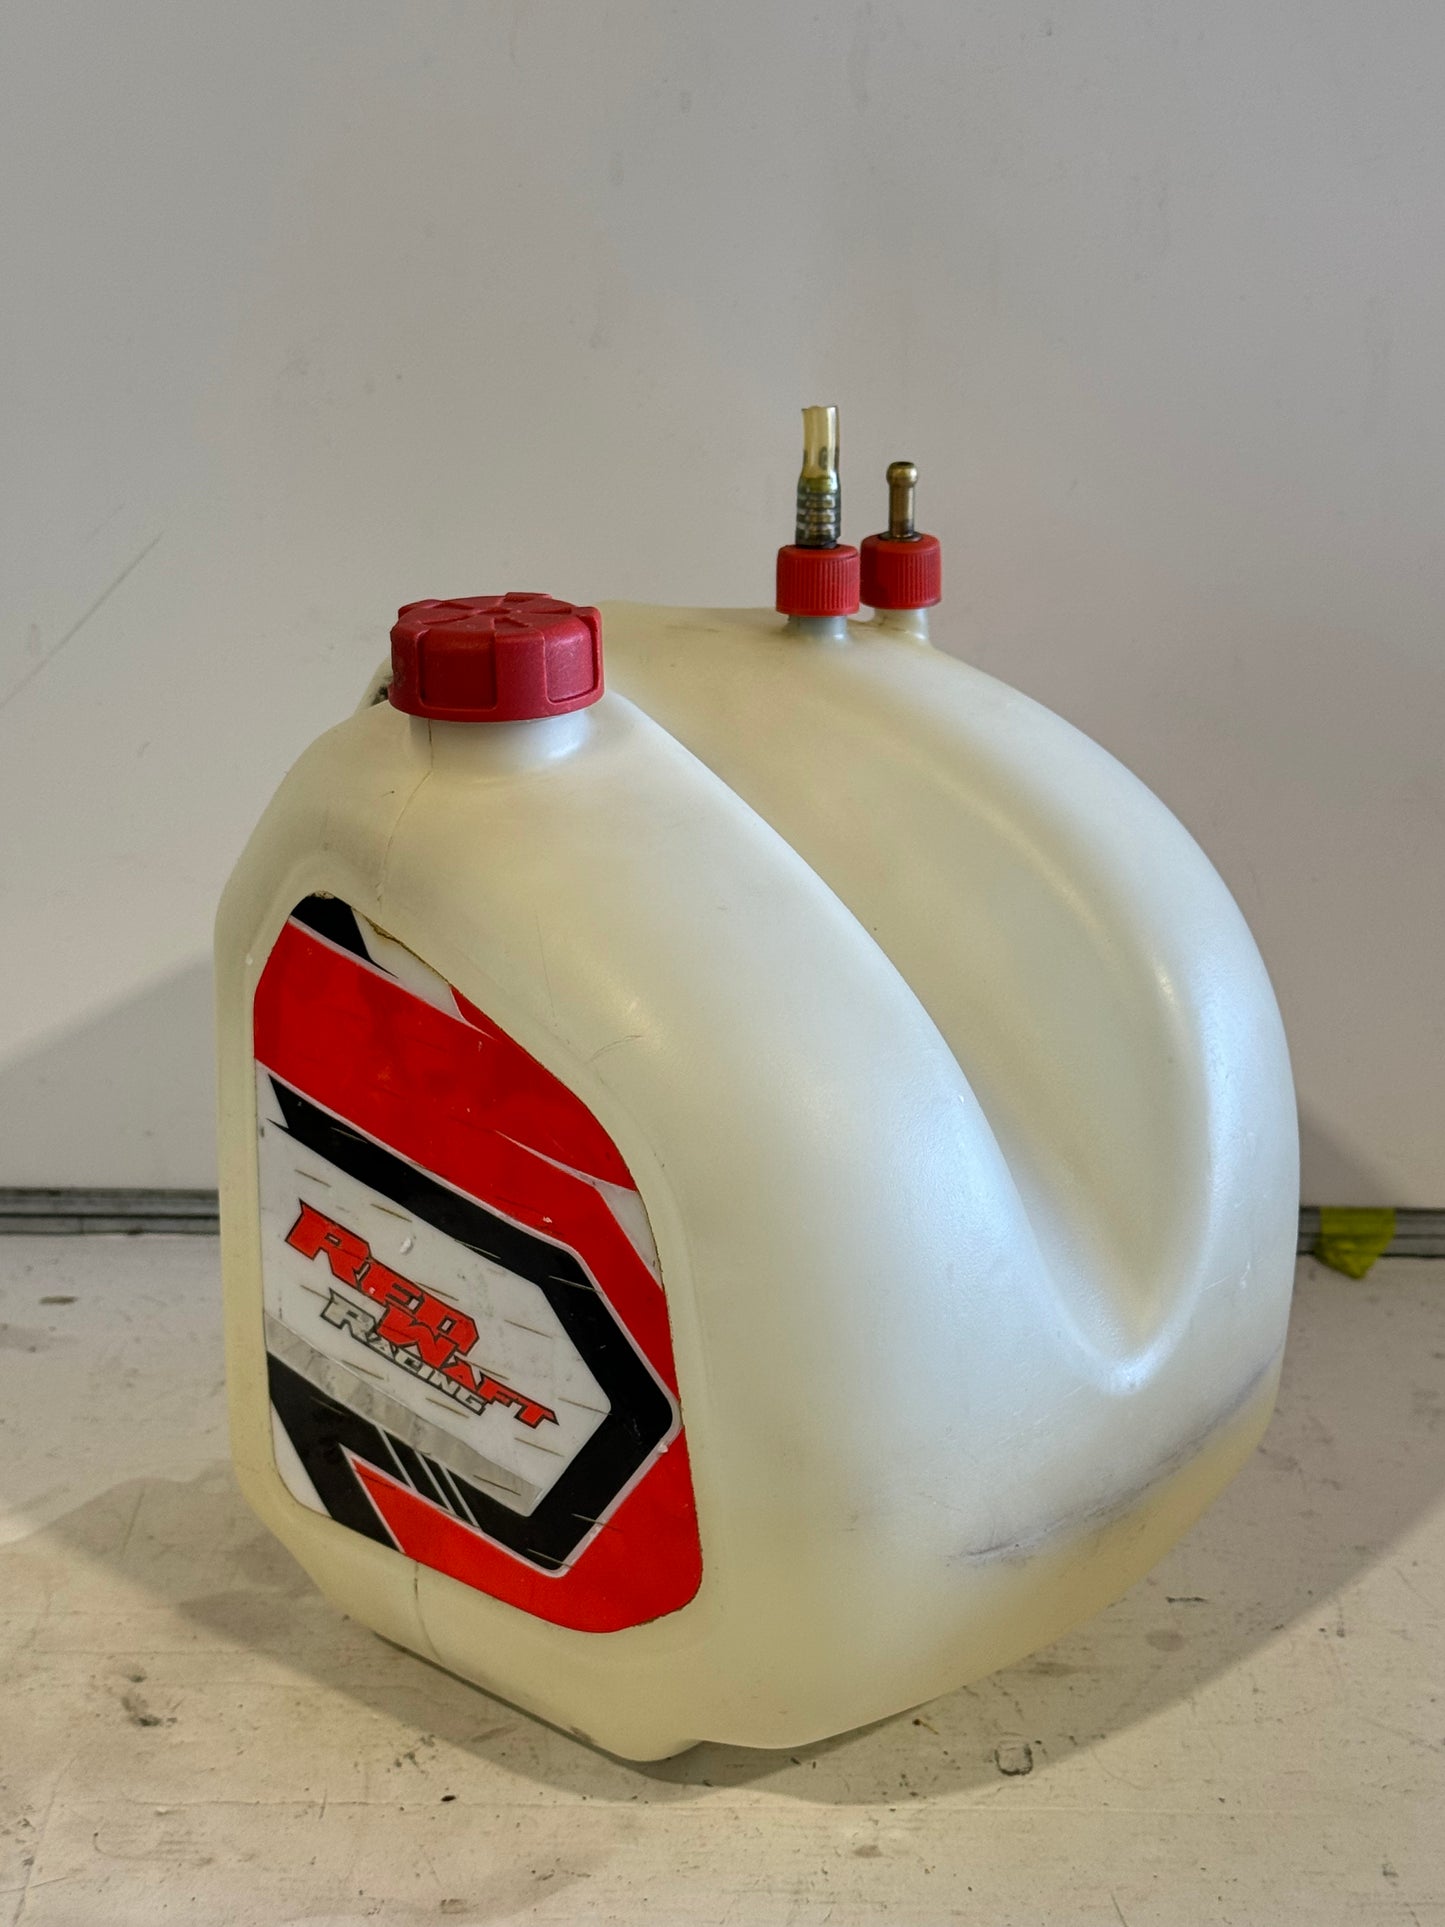 FUEL TANK FROM 2022 KART